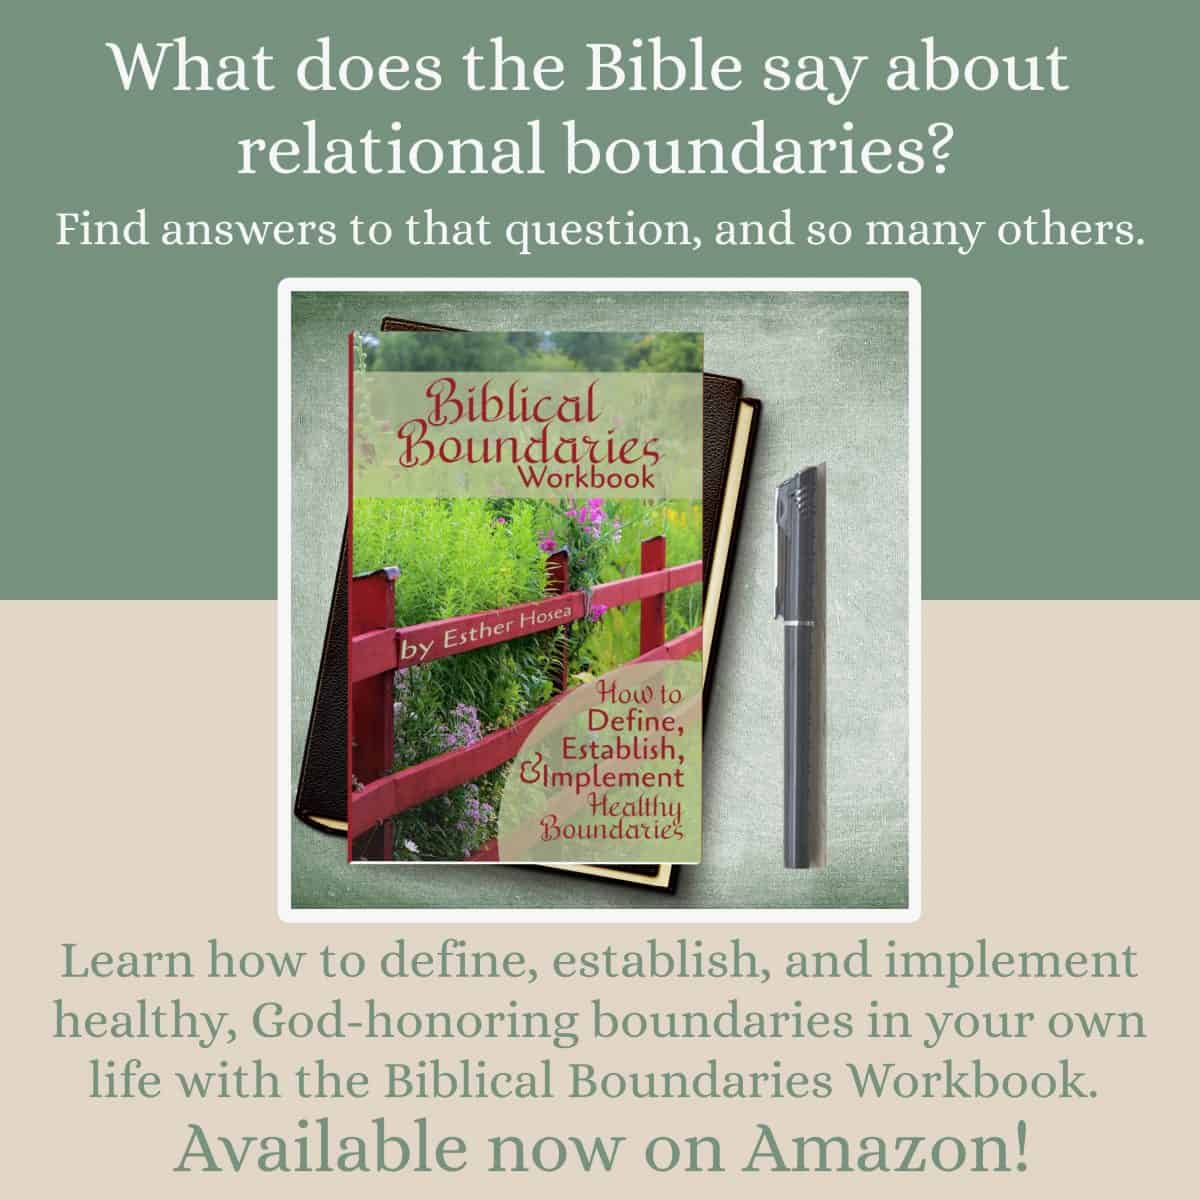 What does the Bible say about relational boundaries? Find answers to that question and many others. Learn how to define, establish, and implement healthy, God-honoring boundaries in your own life with the Biblical Boundaries Workbook. Available now on Amazon!